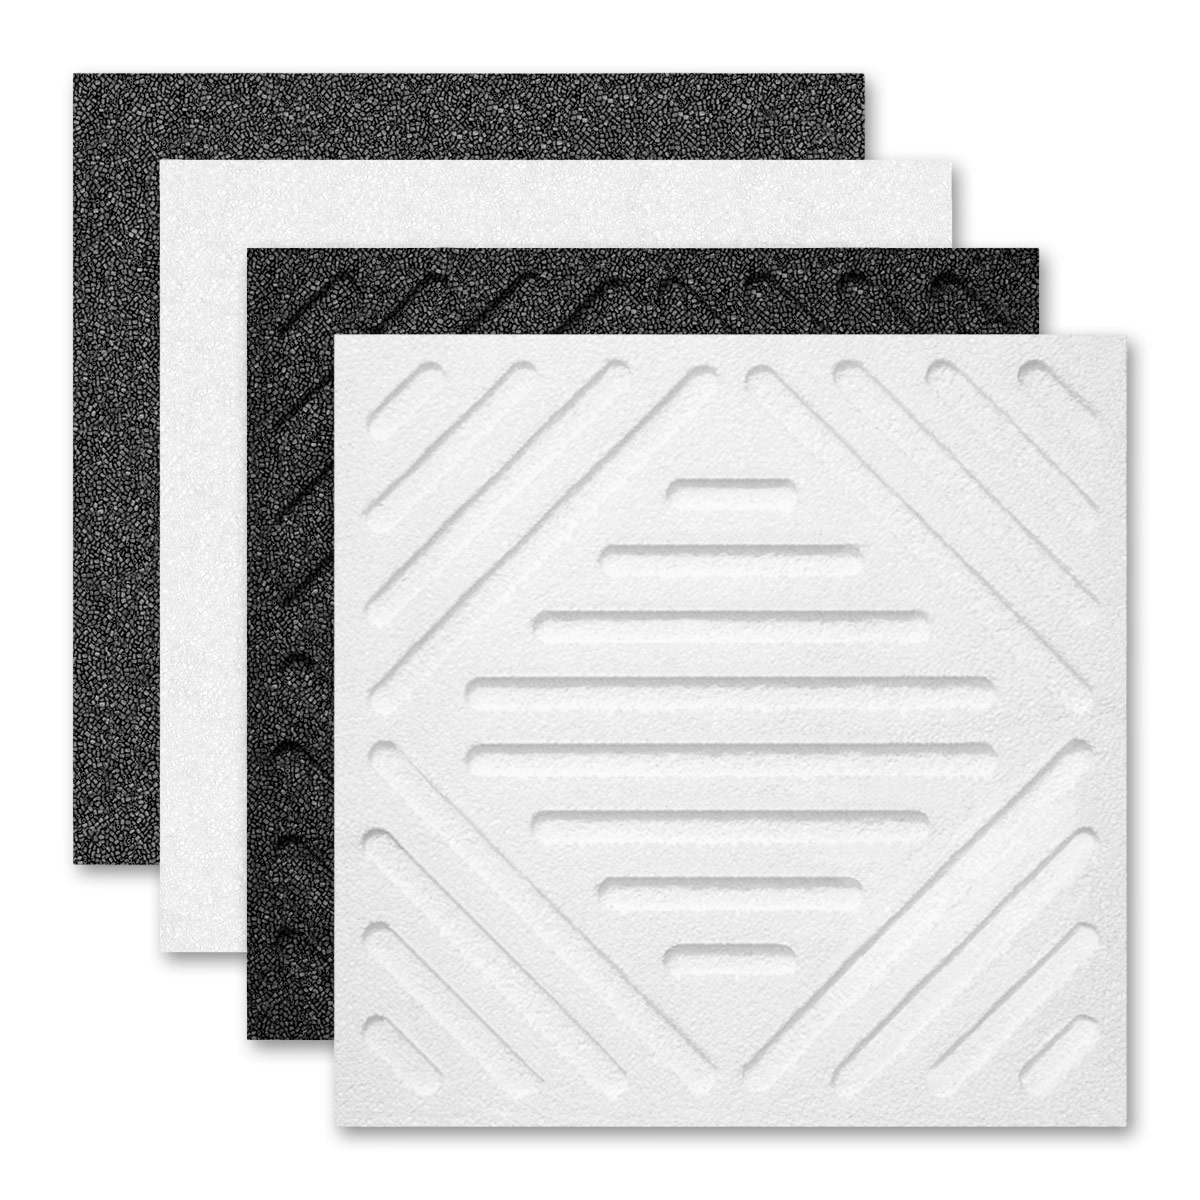 Types of Acoustical Absorption Panels - Soundproof Direct